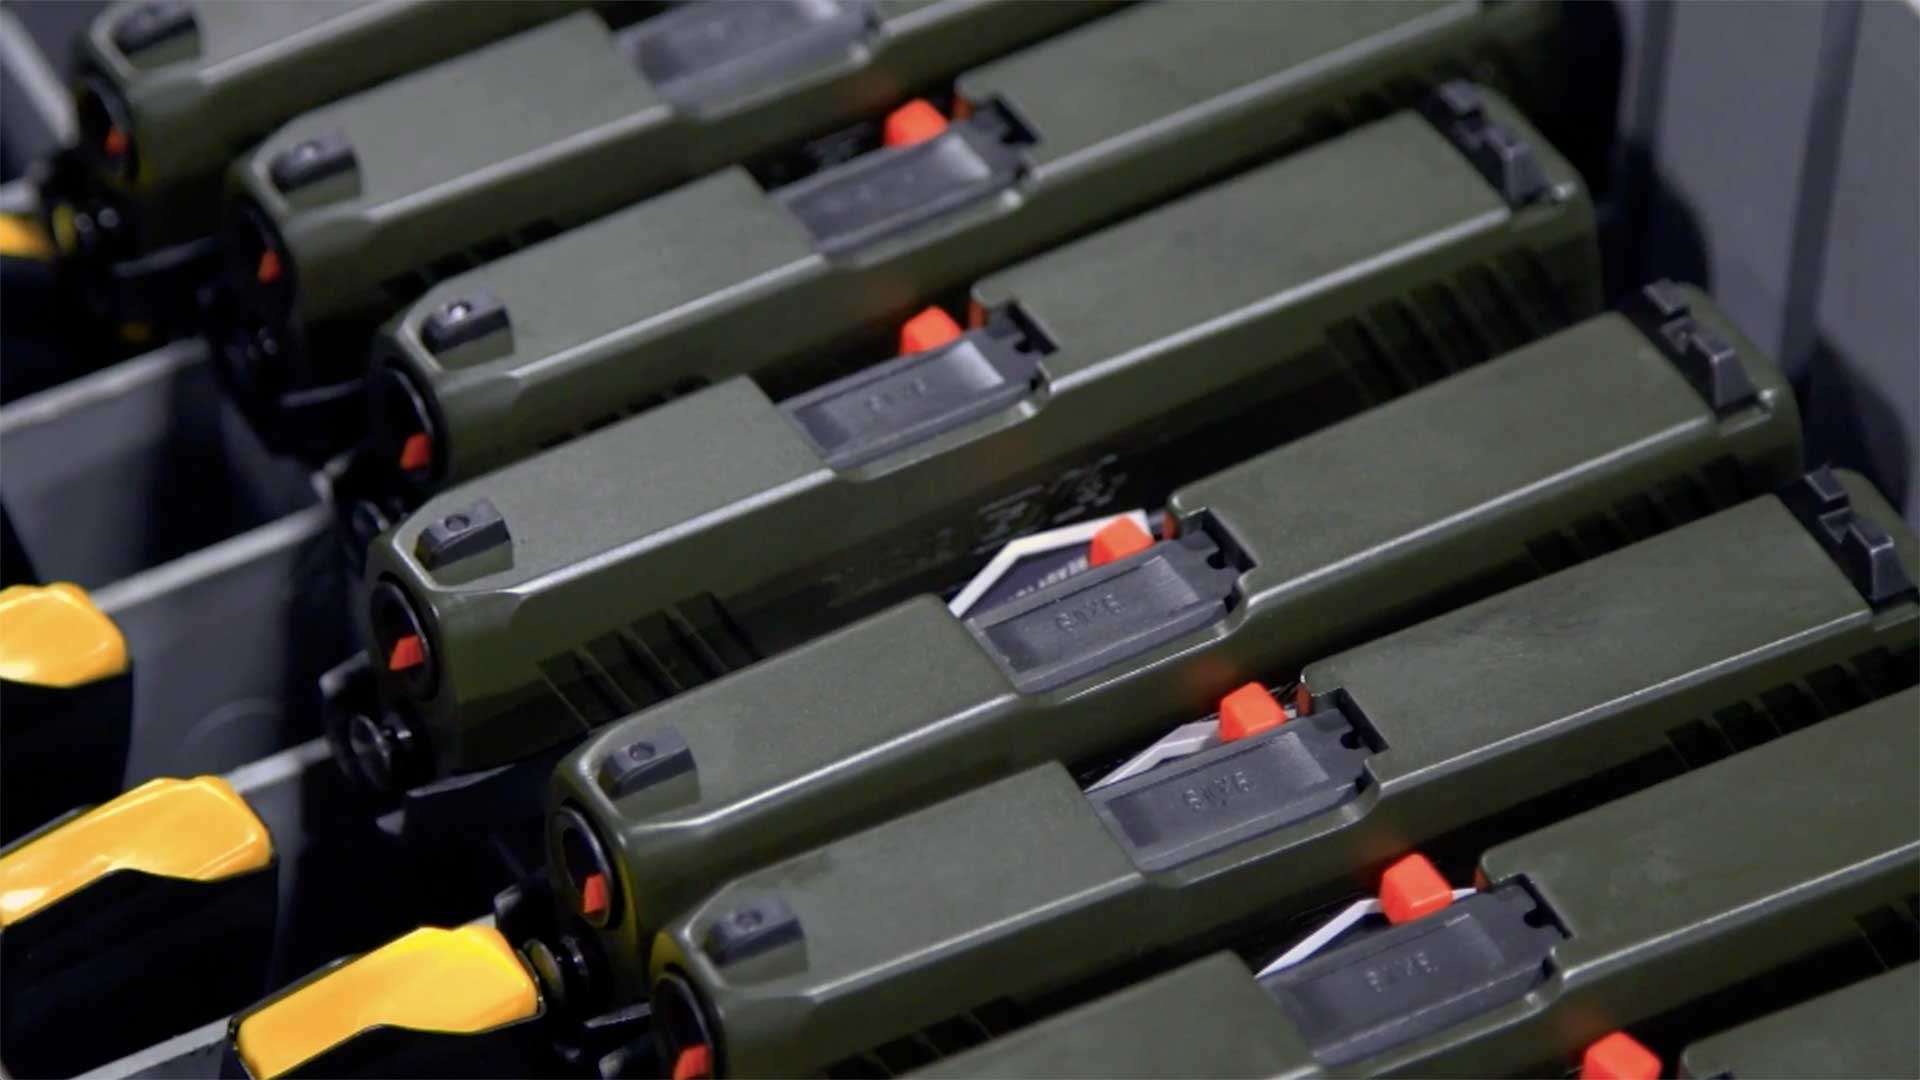 A lineup of OD green-colored Taurus GX4 pistols being readied for shipment.